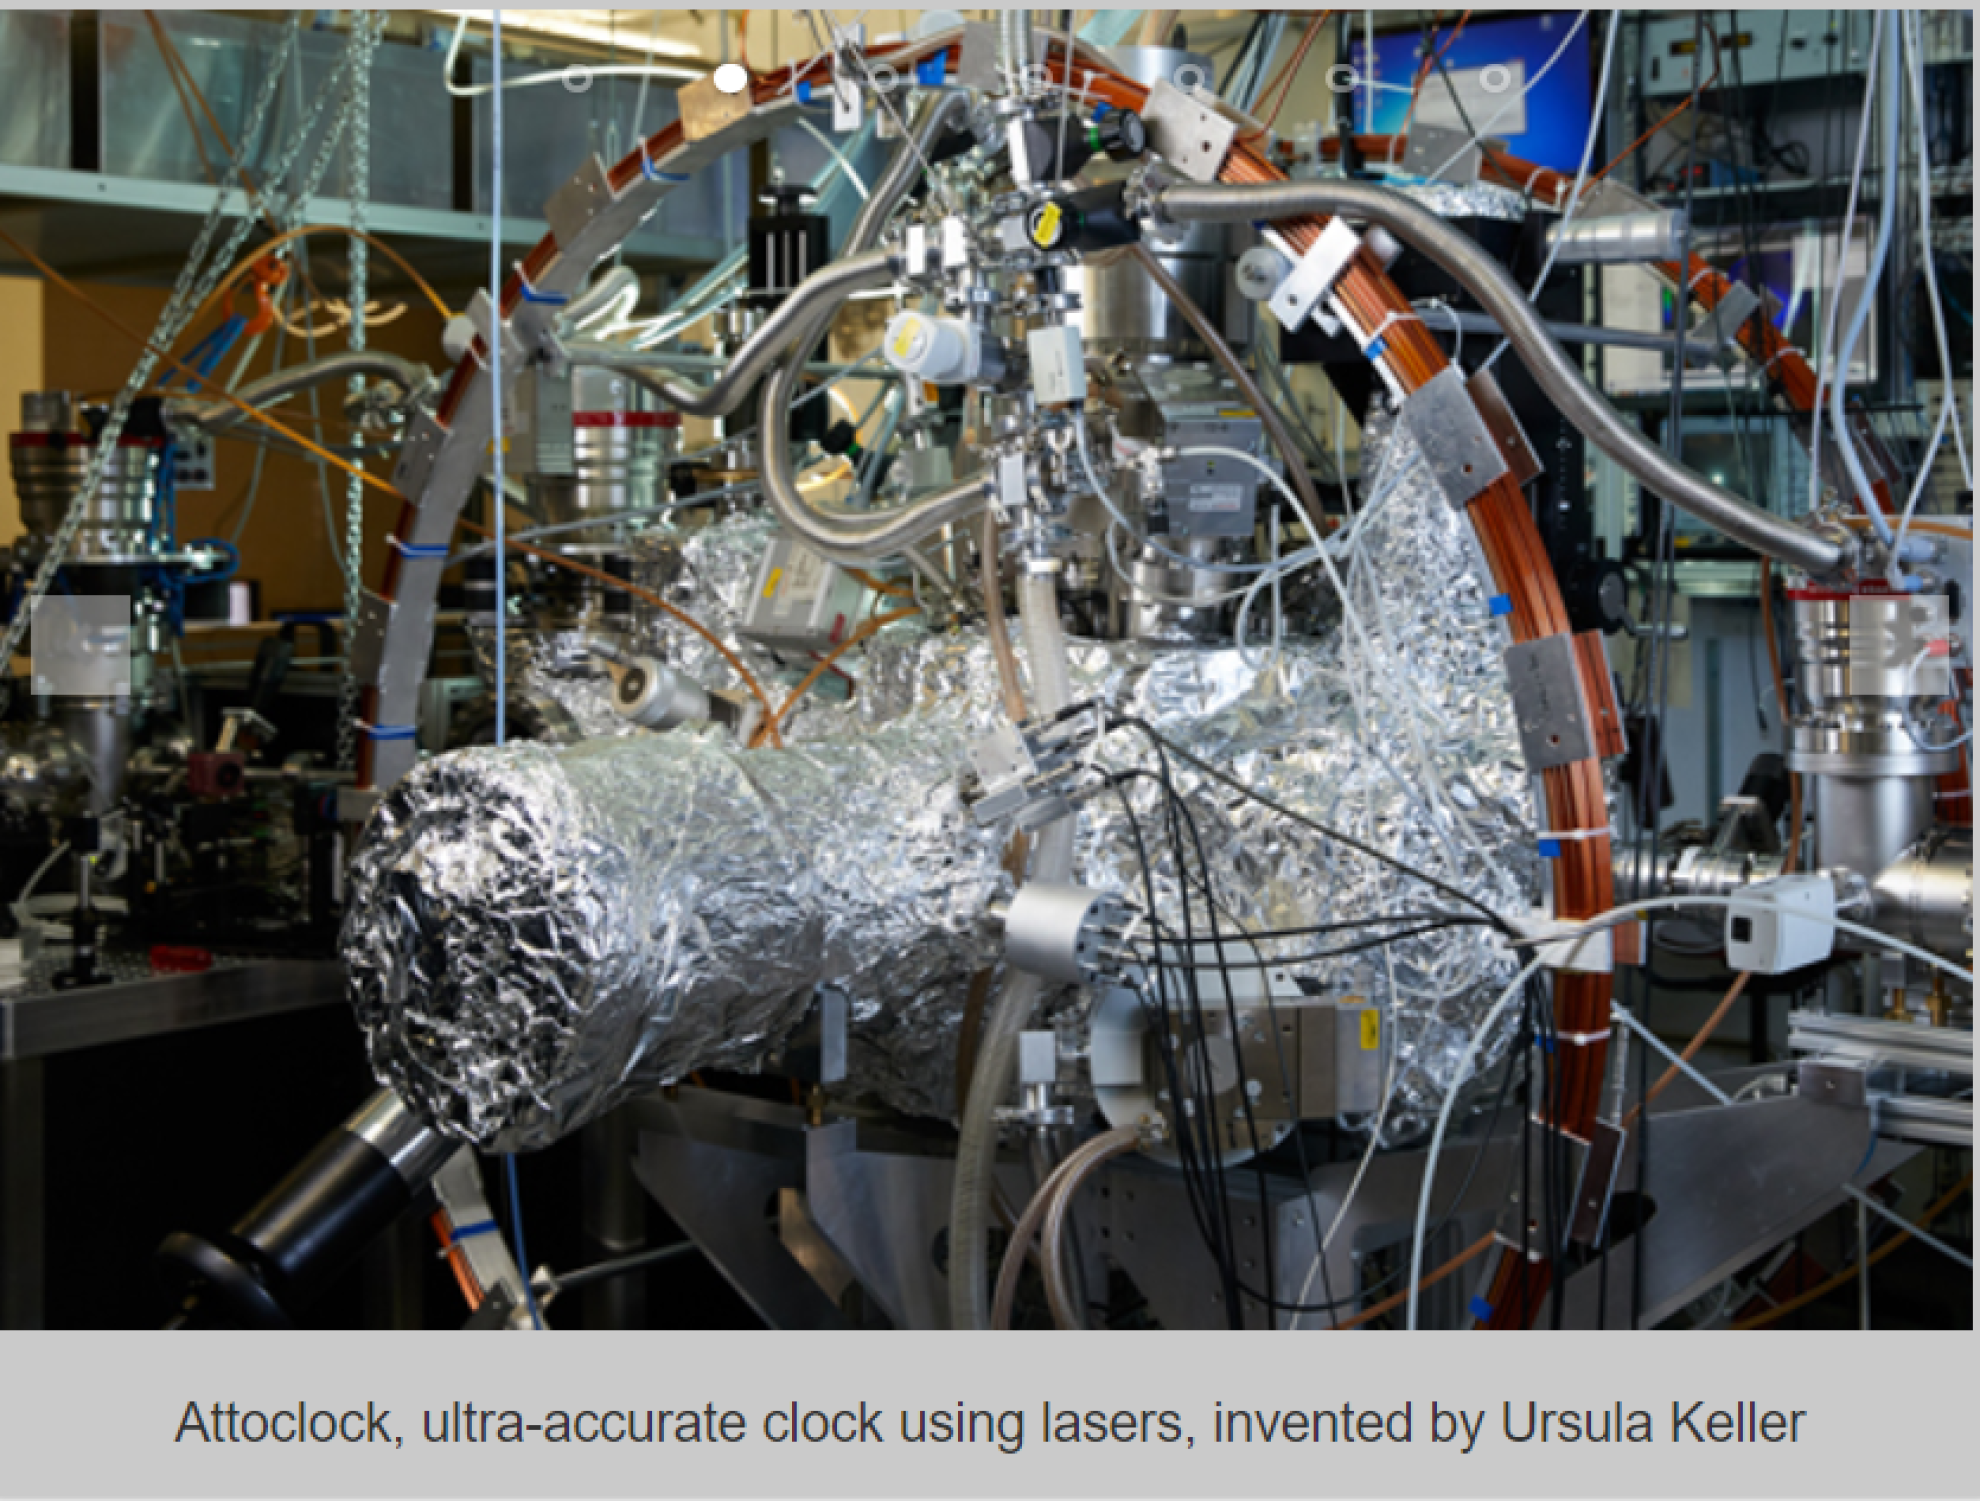 Attoclock, ultra-accurate clock using lasers, invented by Ursula Keller